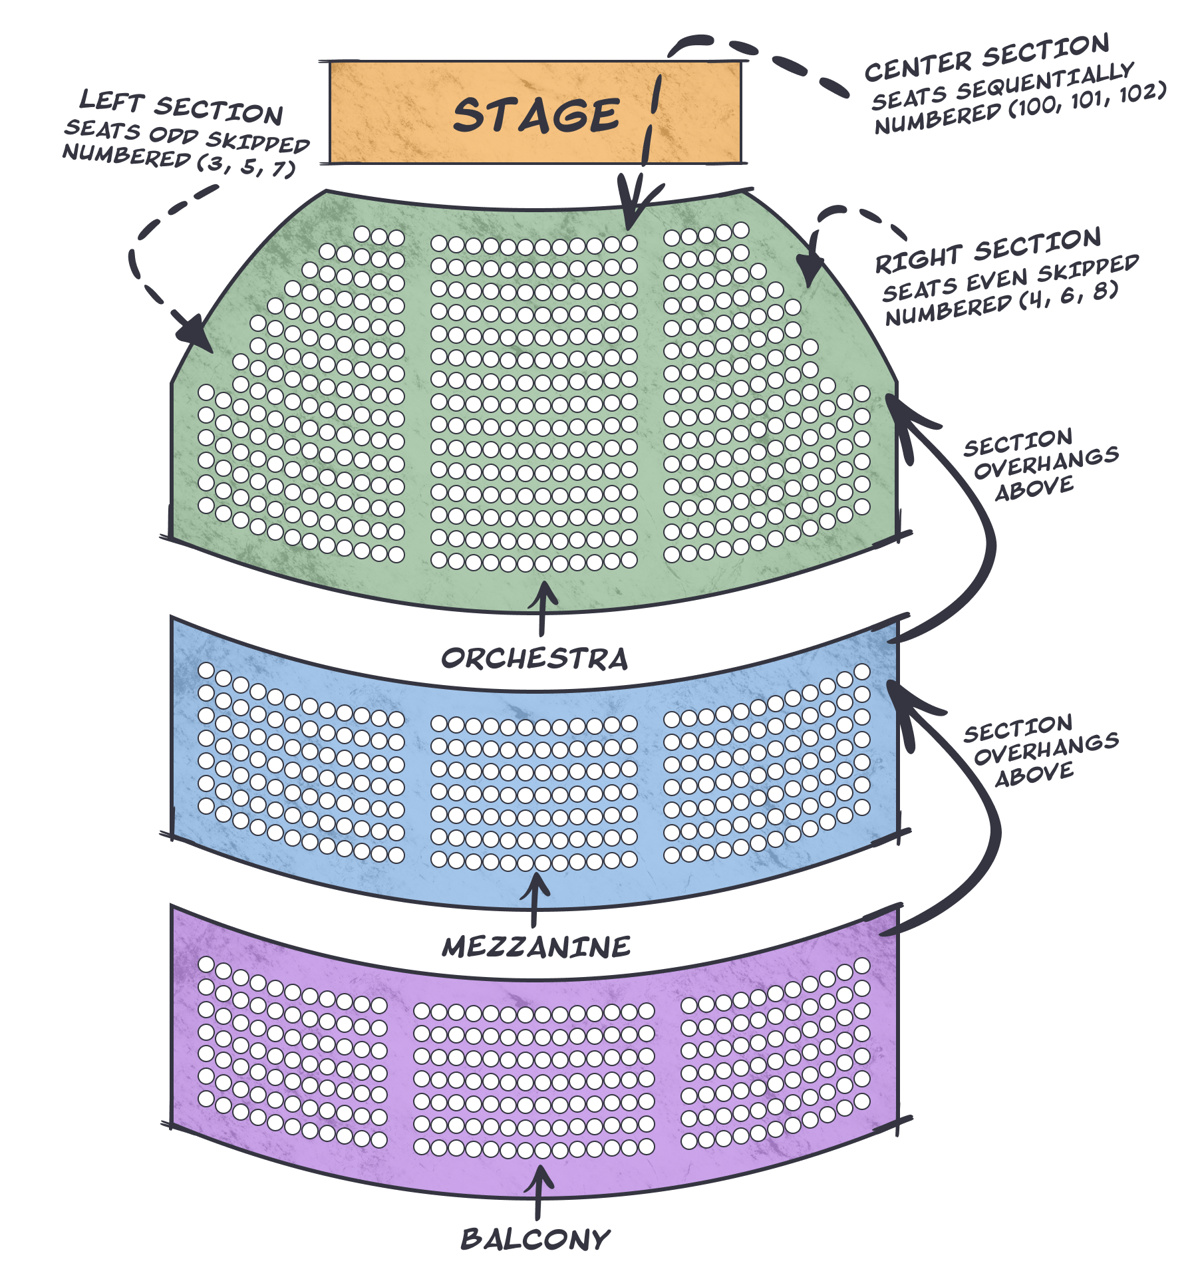 Seating diagram for a typical Broadway theater